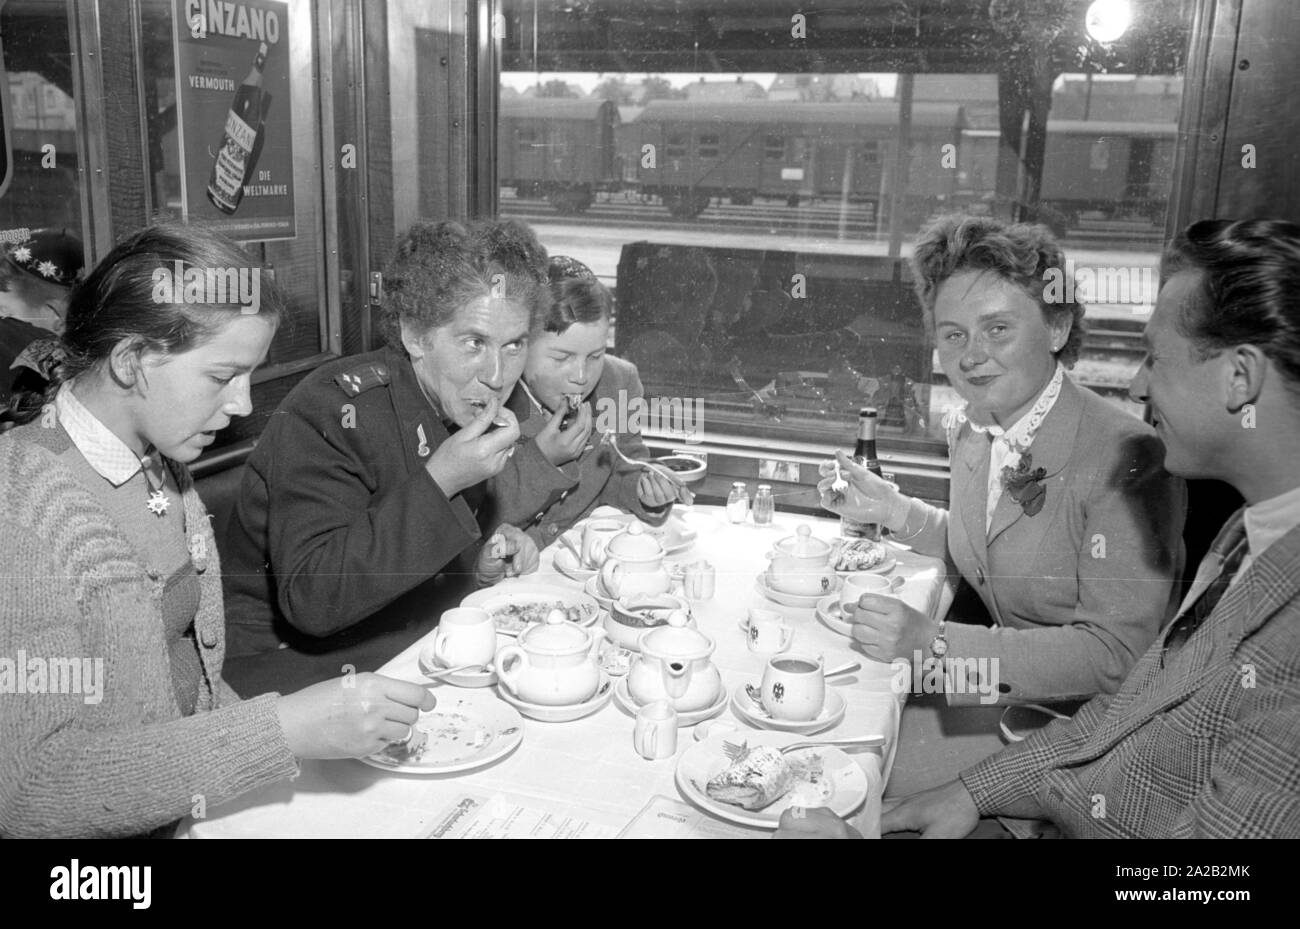 Photo of the interzonal train on the route Leipzig-Gutenfuerst-Hof-Munich. This train was known for its 'all-German' dining car, which was popular due to the 1: 1 exchange rate, especially among East German travelers. Photo of train passengers drinking coffee and eating cake in the dining car. The East German railway employee (left) with her two children sits at the table together with a woman from Munich and a student from the village. Stock Photo